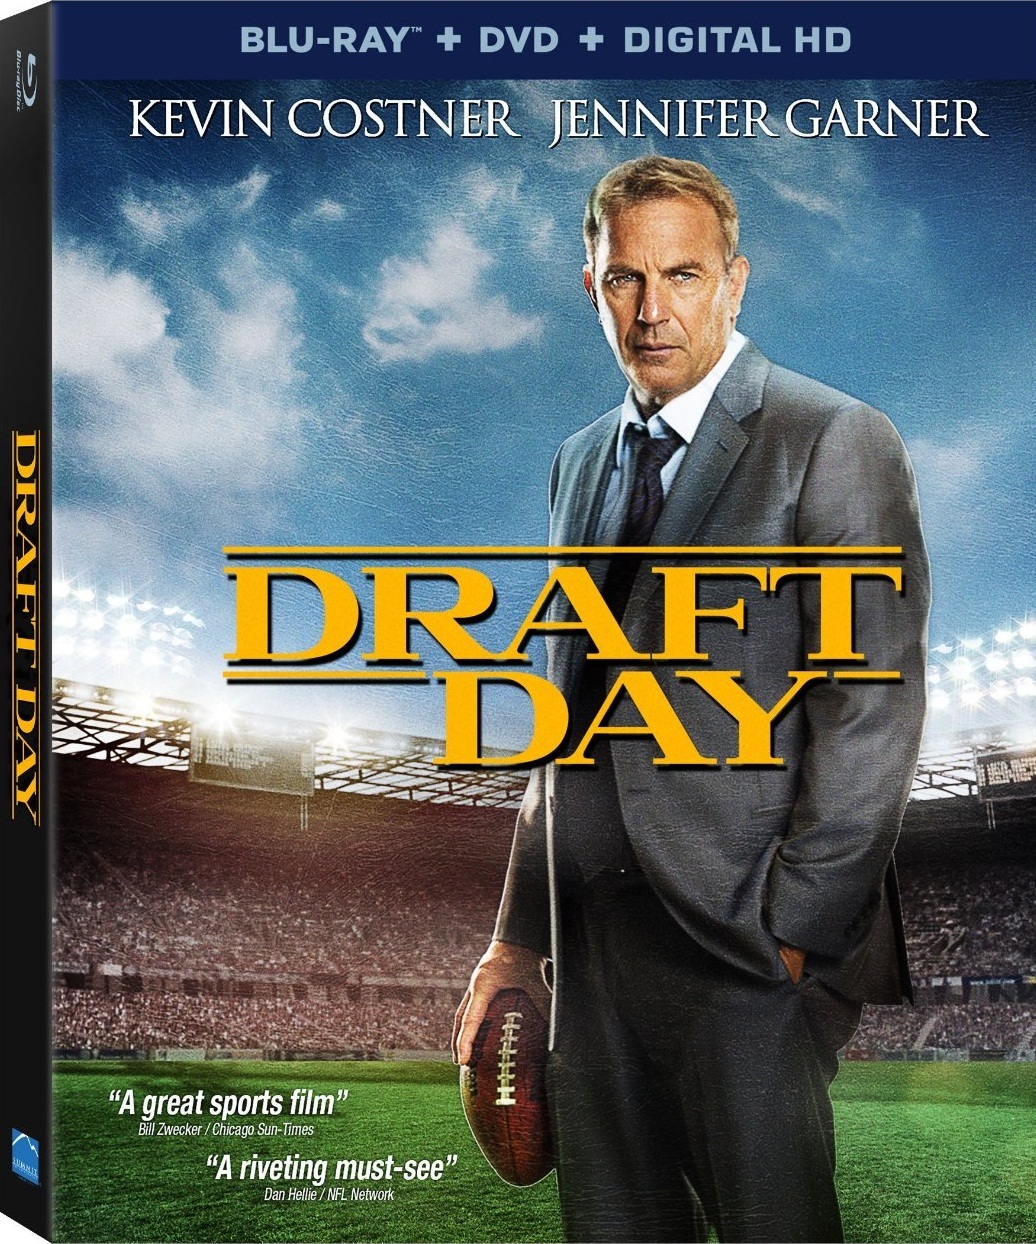 Draft Day Blu-ray Review